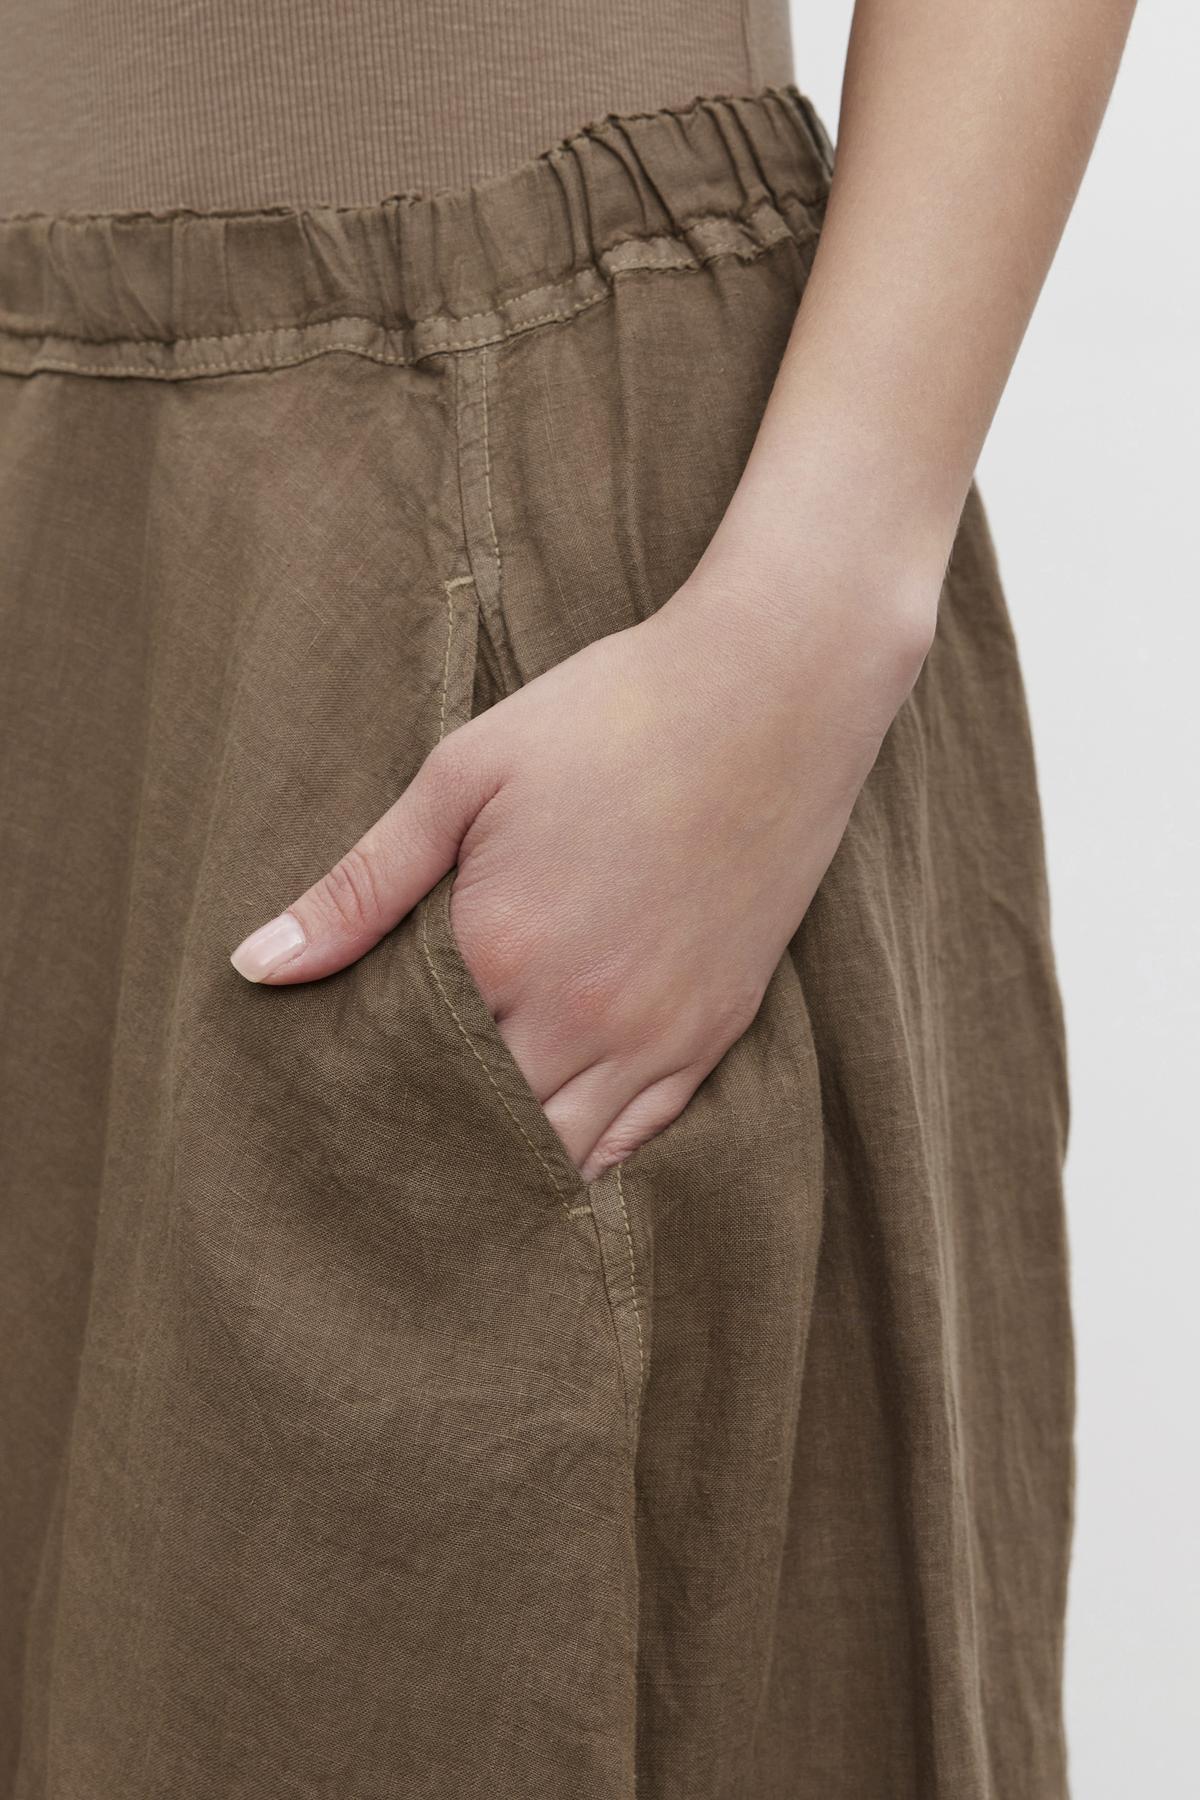 A close-up of a person's hand with fingers tucked into the pocket of a brown linen FAE LINEN A-LINE SKIRT by Velvet by Graham & Spencer.-36443407188161